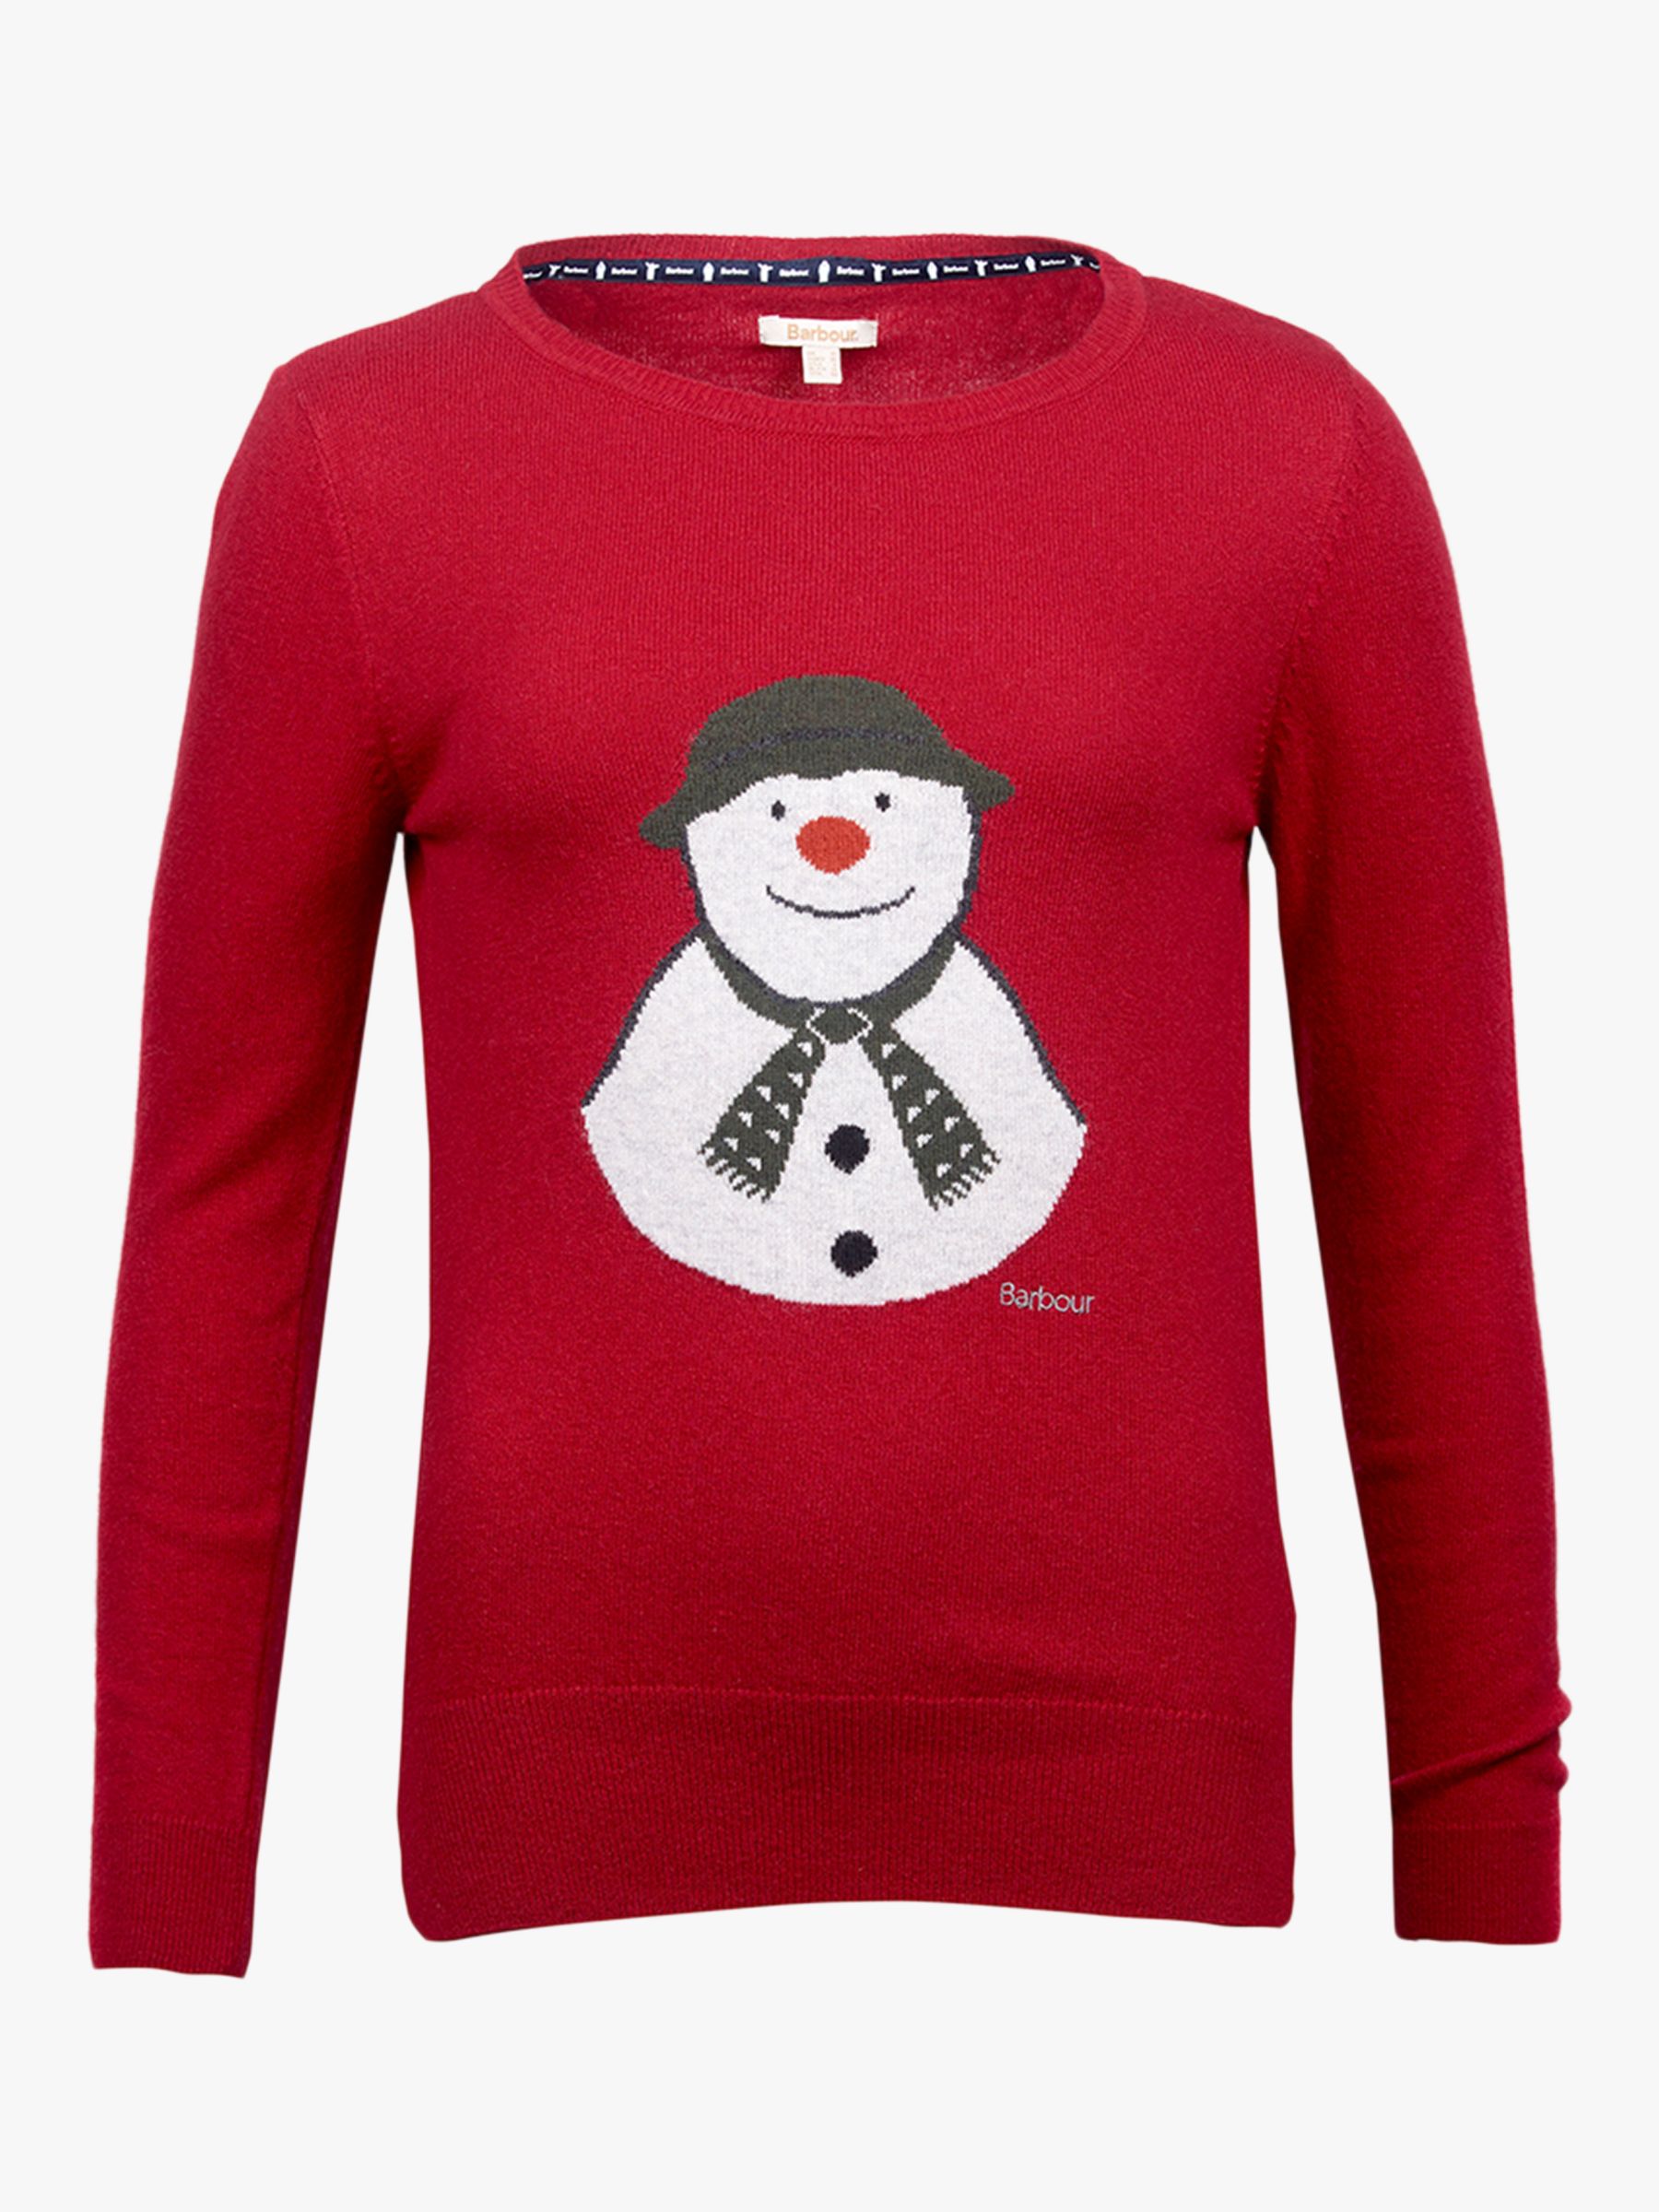 Barbour Highland Snowman Christmas Jumper, Red at John Lewis & Partners